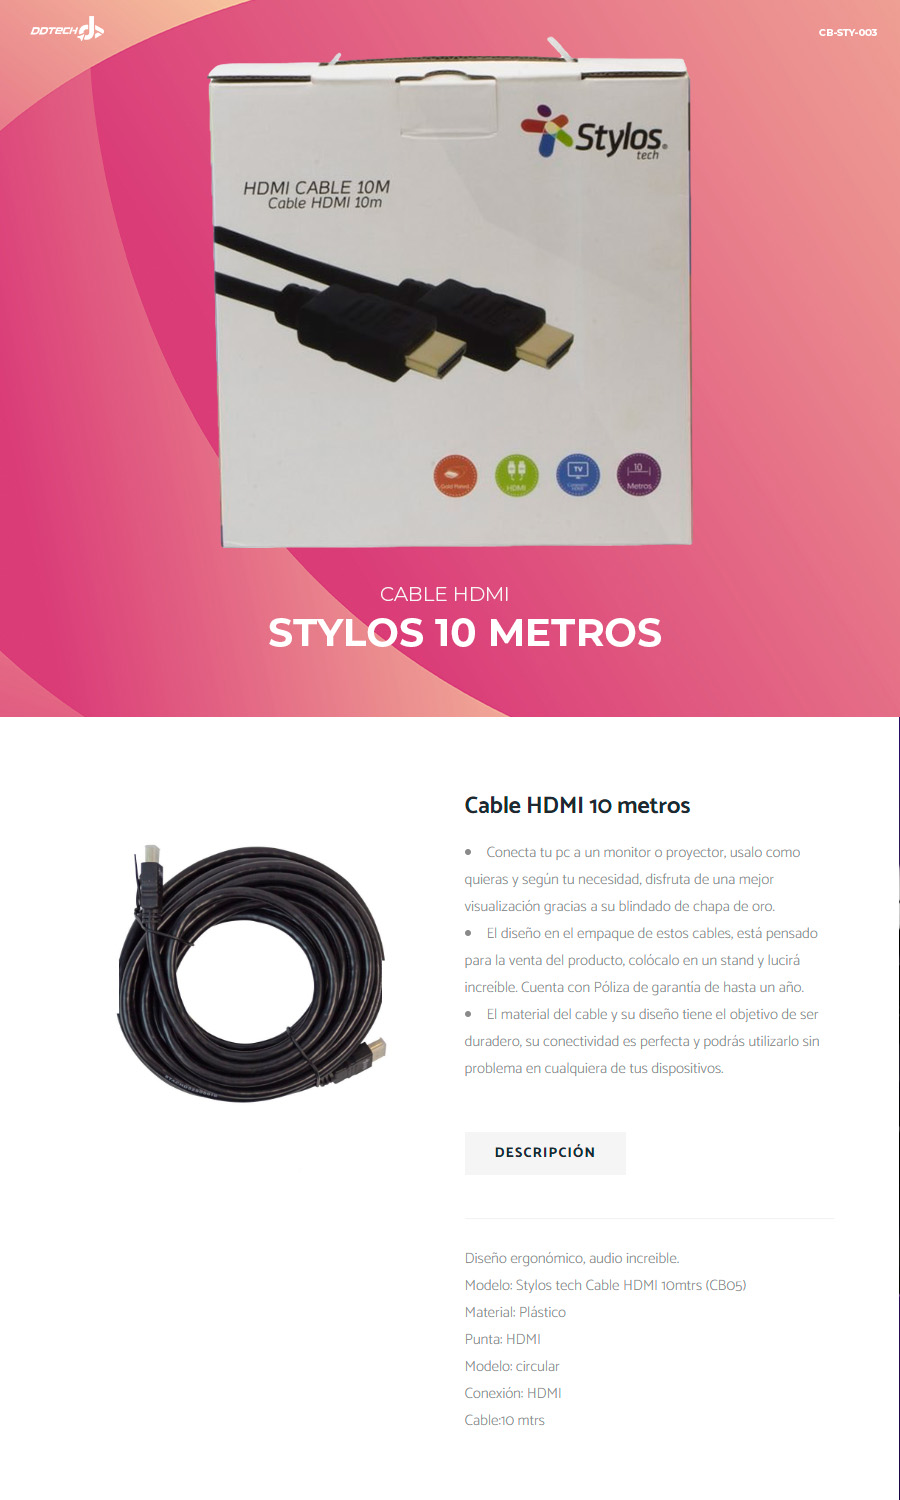 Cable HDMI Stylos Negro 2 metros, Cables